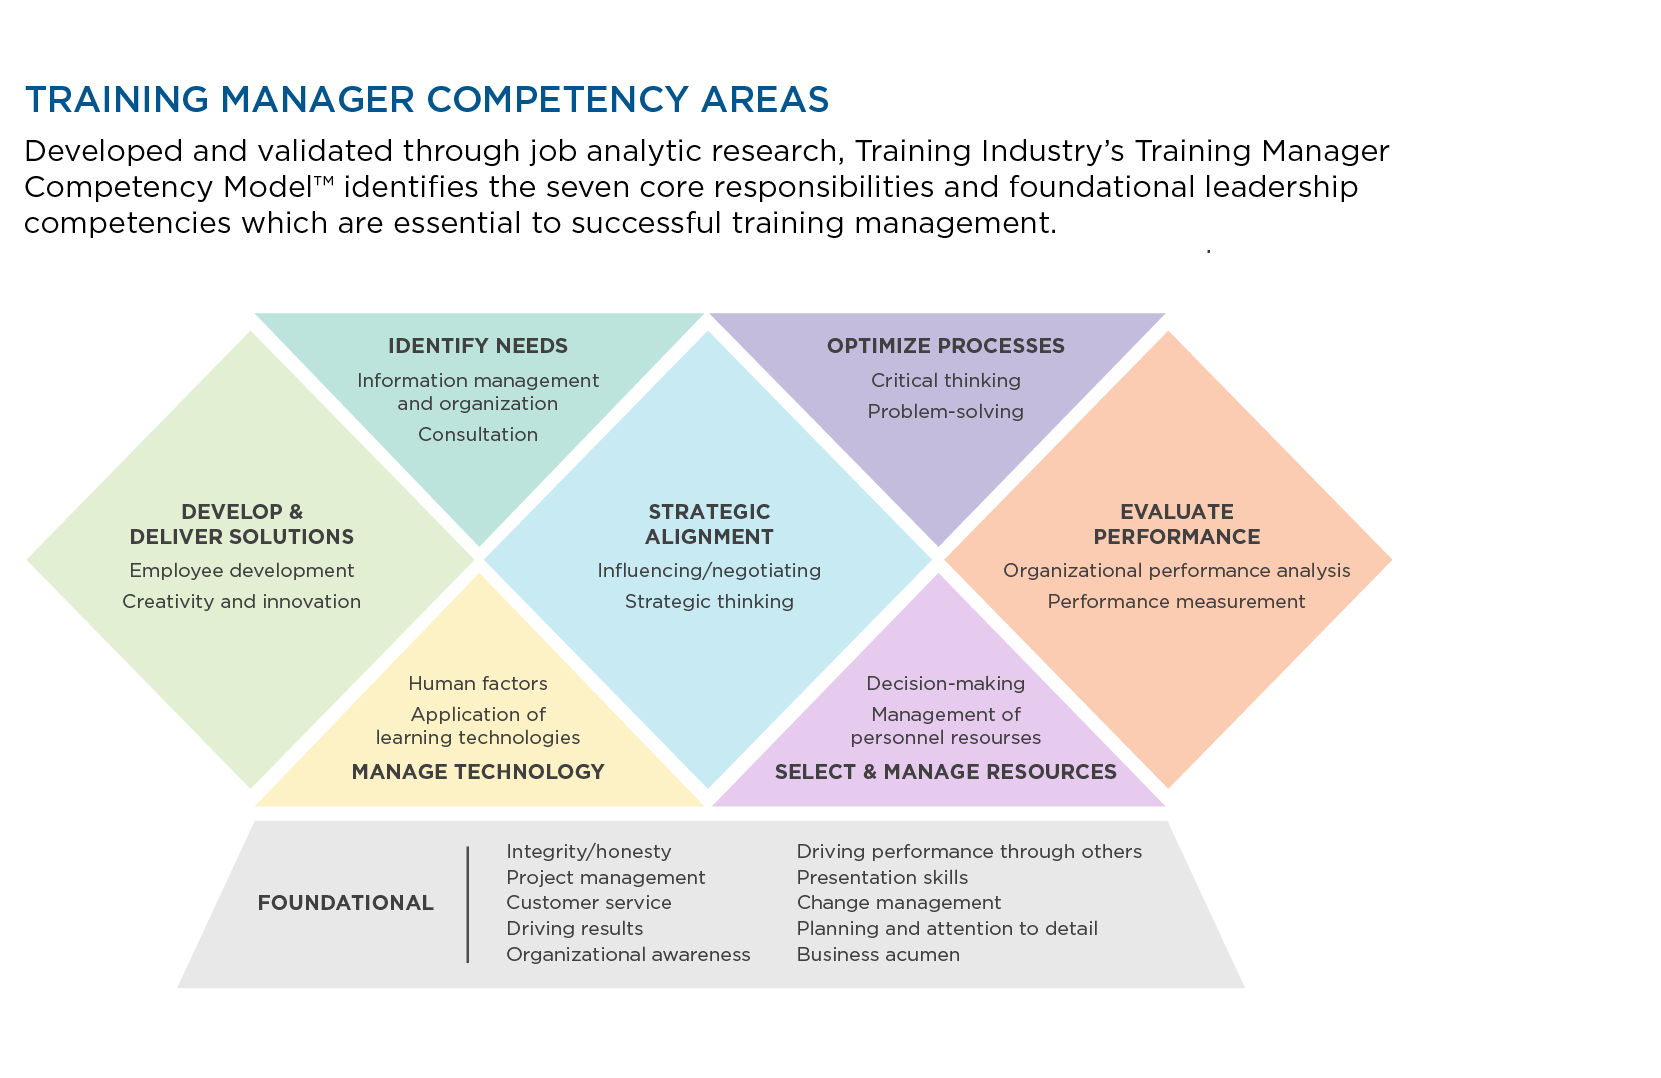 Training Manager Competencies